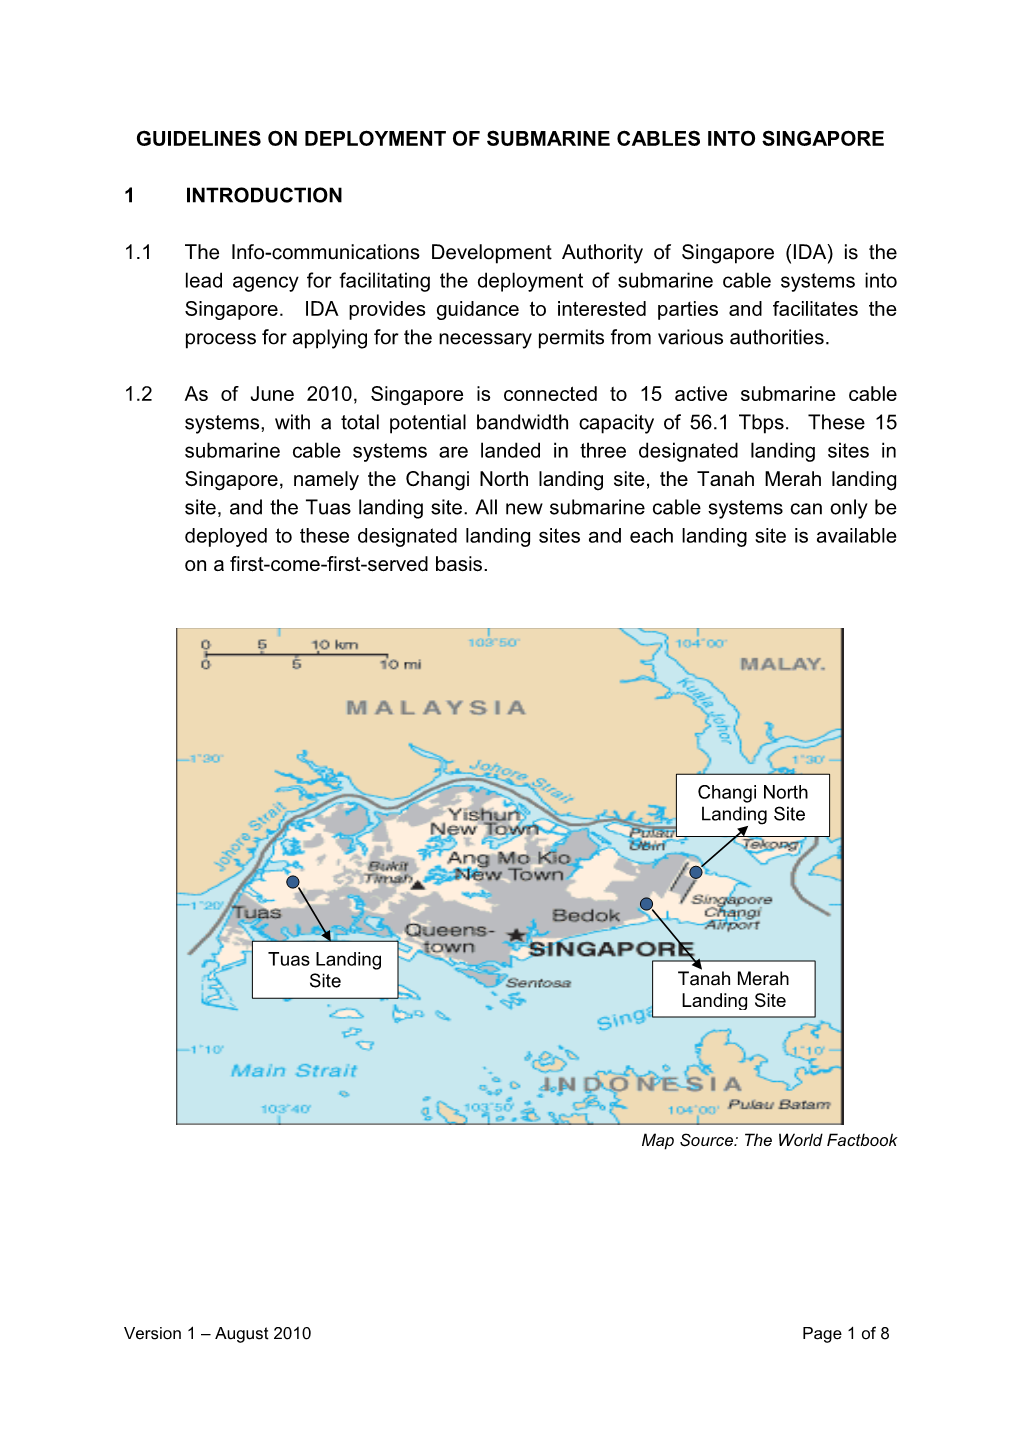 Guide for Submarine Cable Landing Into Singapore